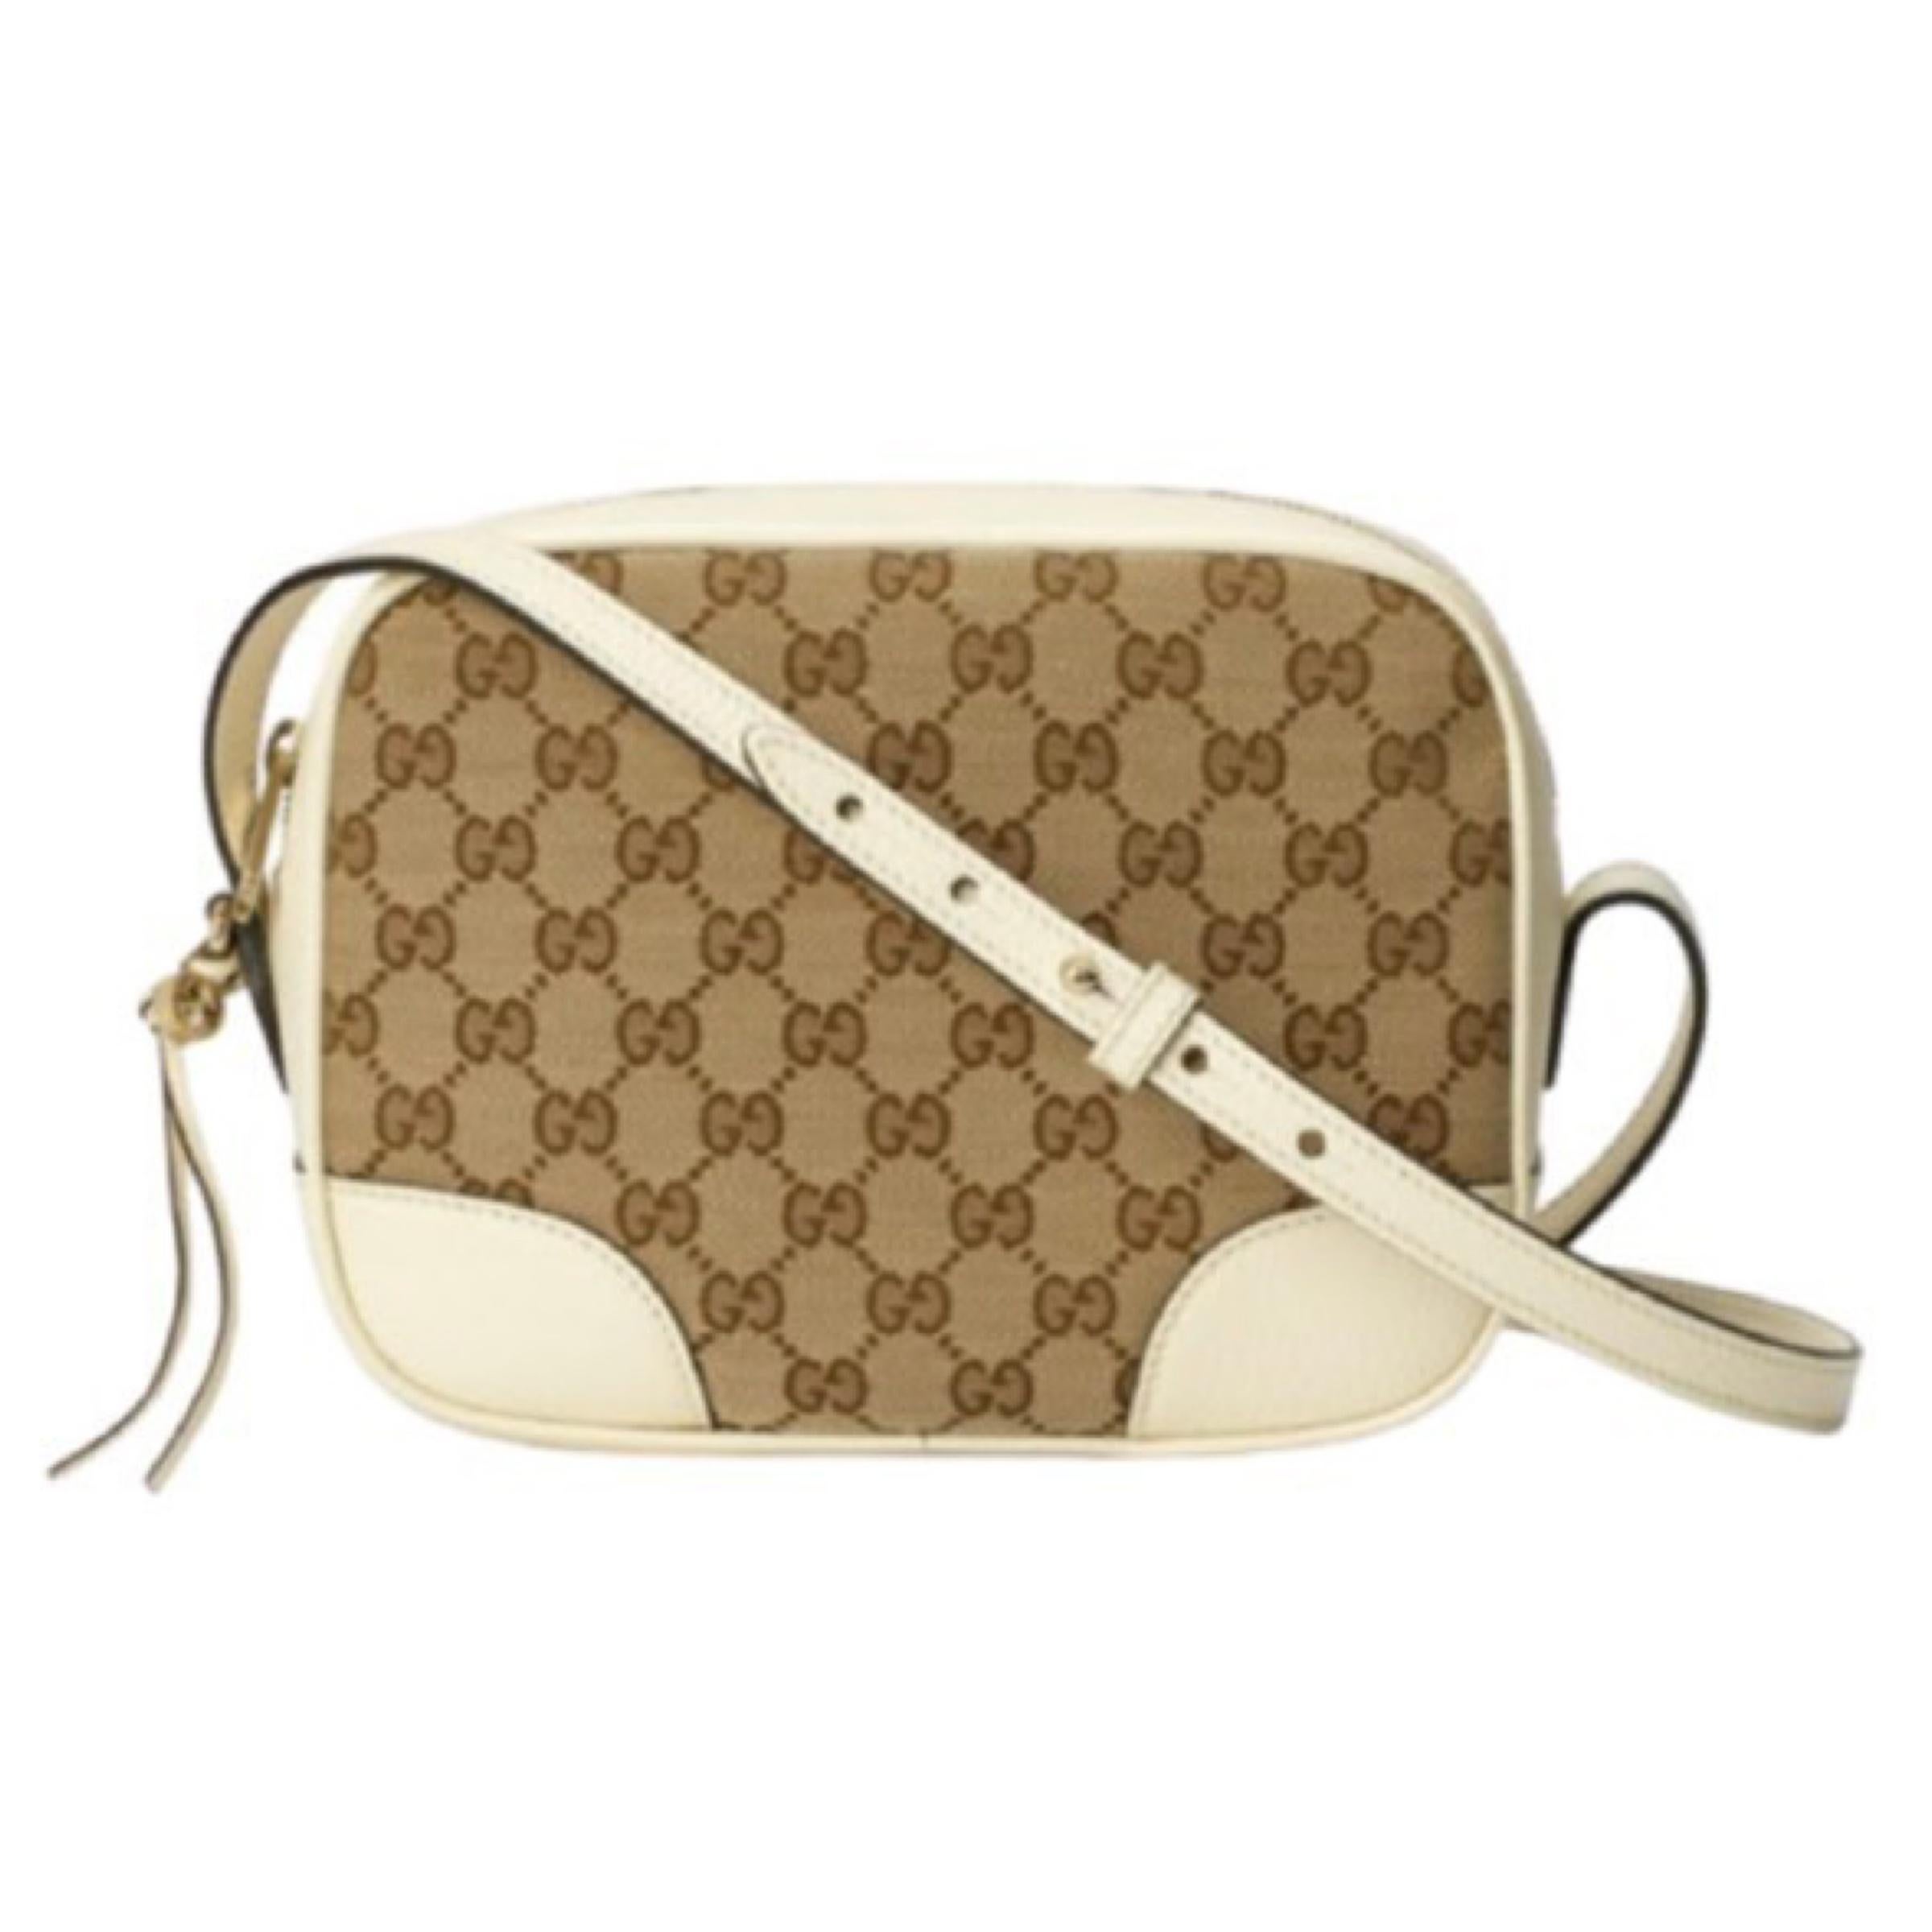 New Gucci Beige White Canvas Leather GG Guccissima Bree Crossbody Camera Bag 

Authenticity Guaranteed

DETAILS
Brand: Gucci
Condition: Brand new
Gender: Women
Category: Crossbody Bag
Style: Bree
Color: White and beige
Material: Canvas and